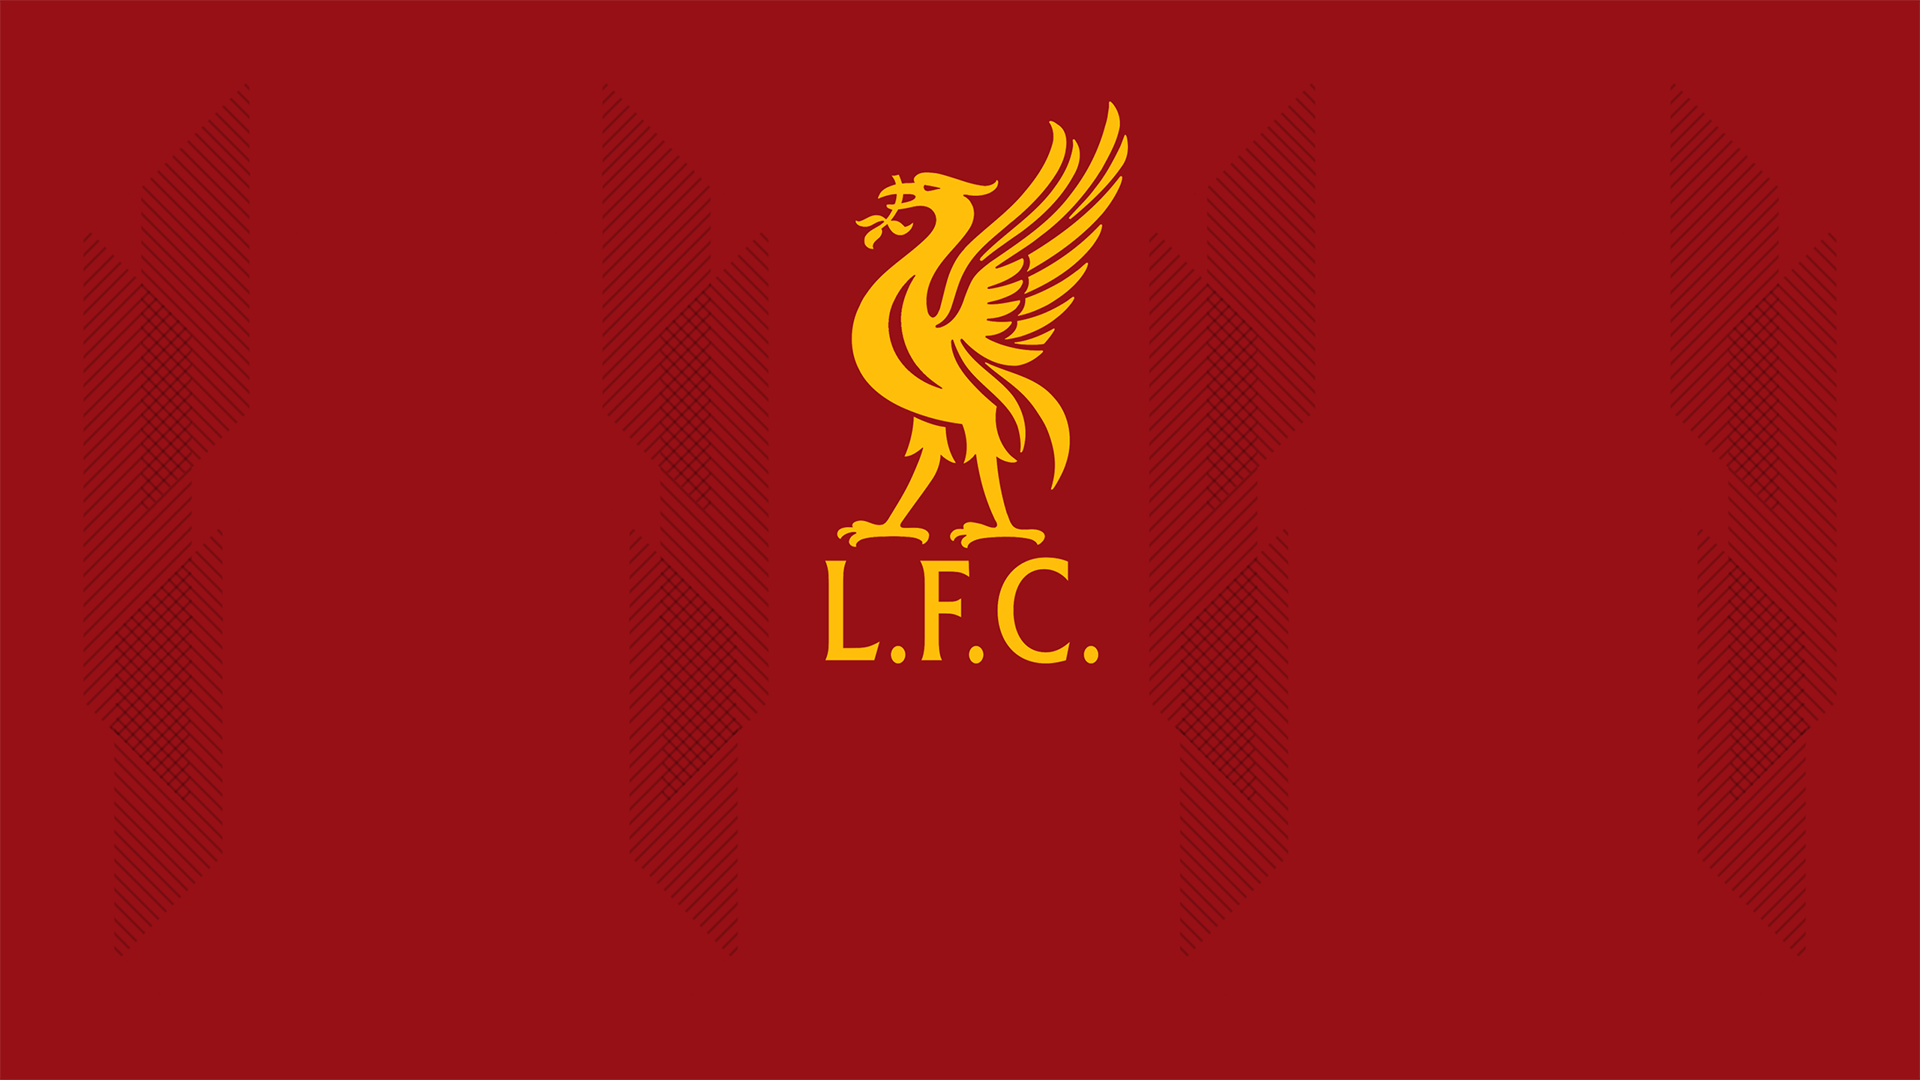 Made a desktop wallpaper inspired by the new home kit